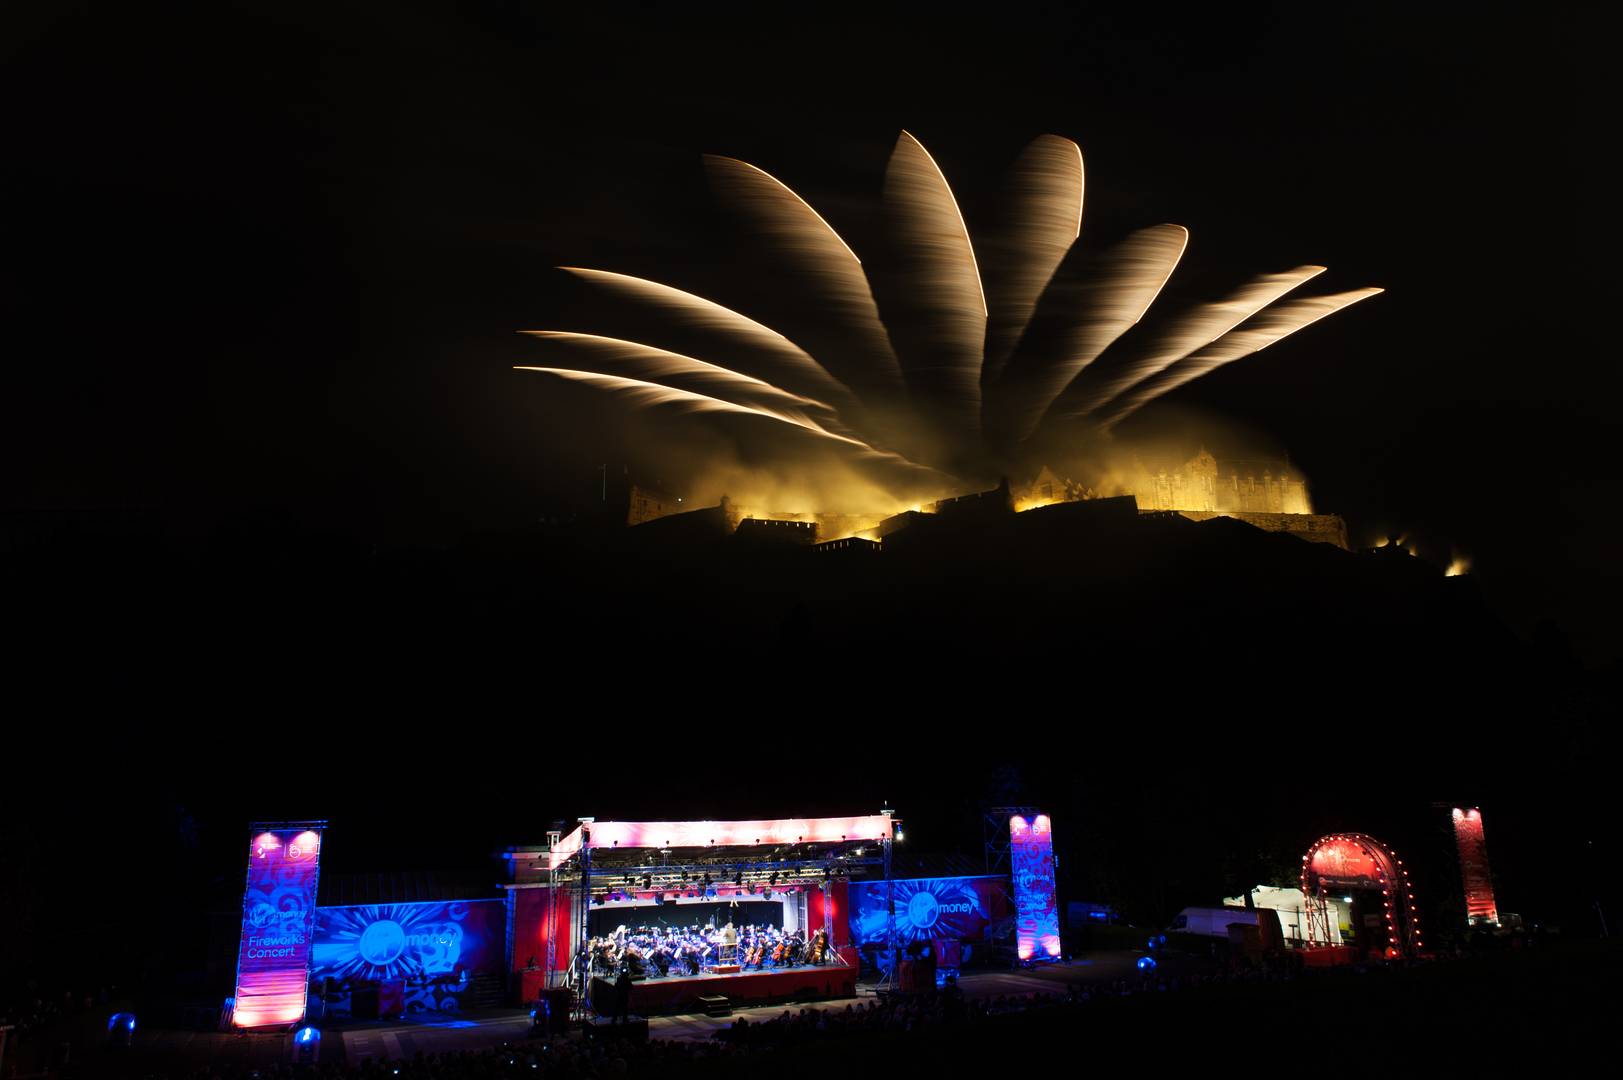 The Ross Bandstand at night during the Edinburgh Fireworks Concert with fireworks in the sky.